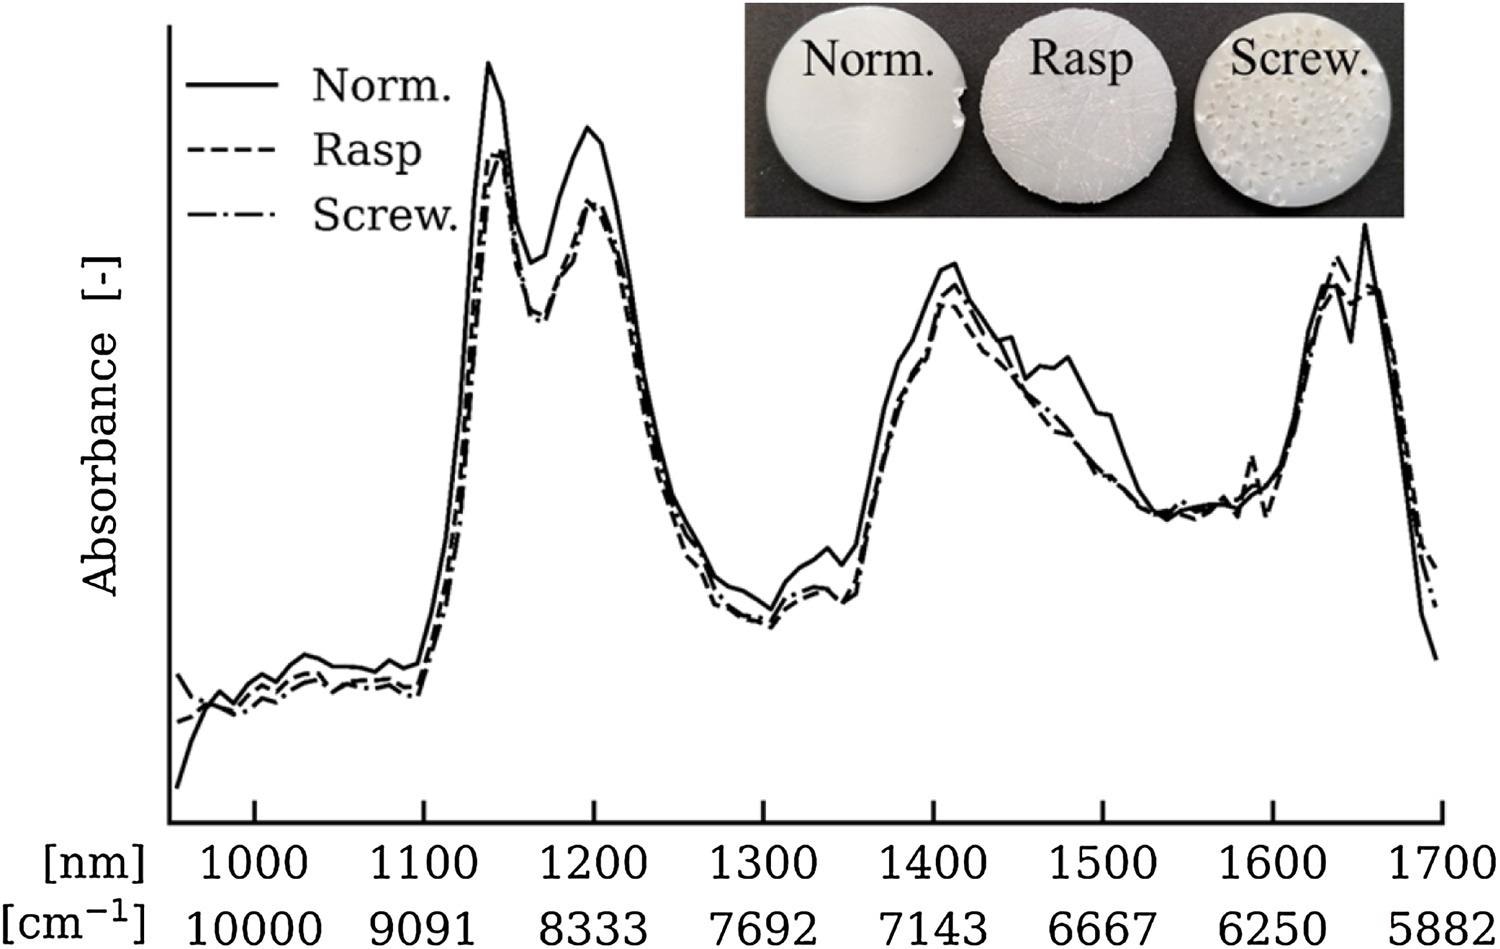 Average spectra measured 10 ABS samples (Norm.), five ABS samples surface treated with a wood rasp (Rasp), and five ABS samples surface treated with screwdriver indentations.